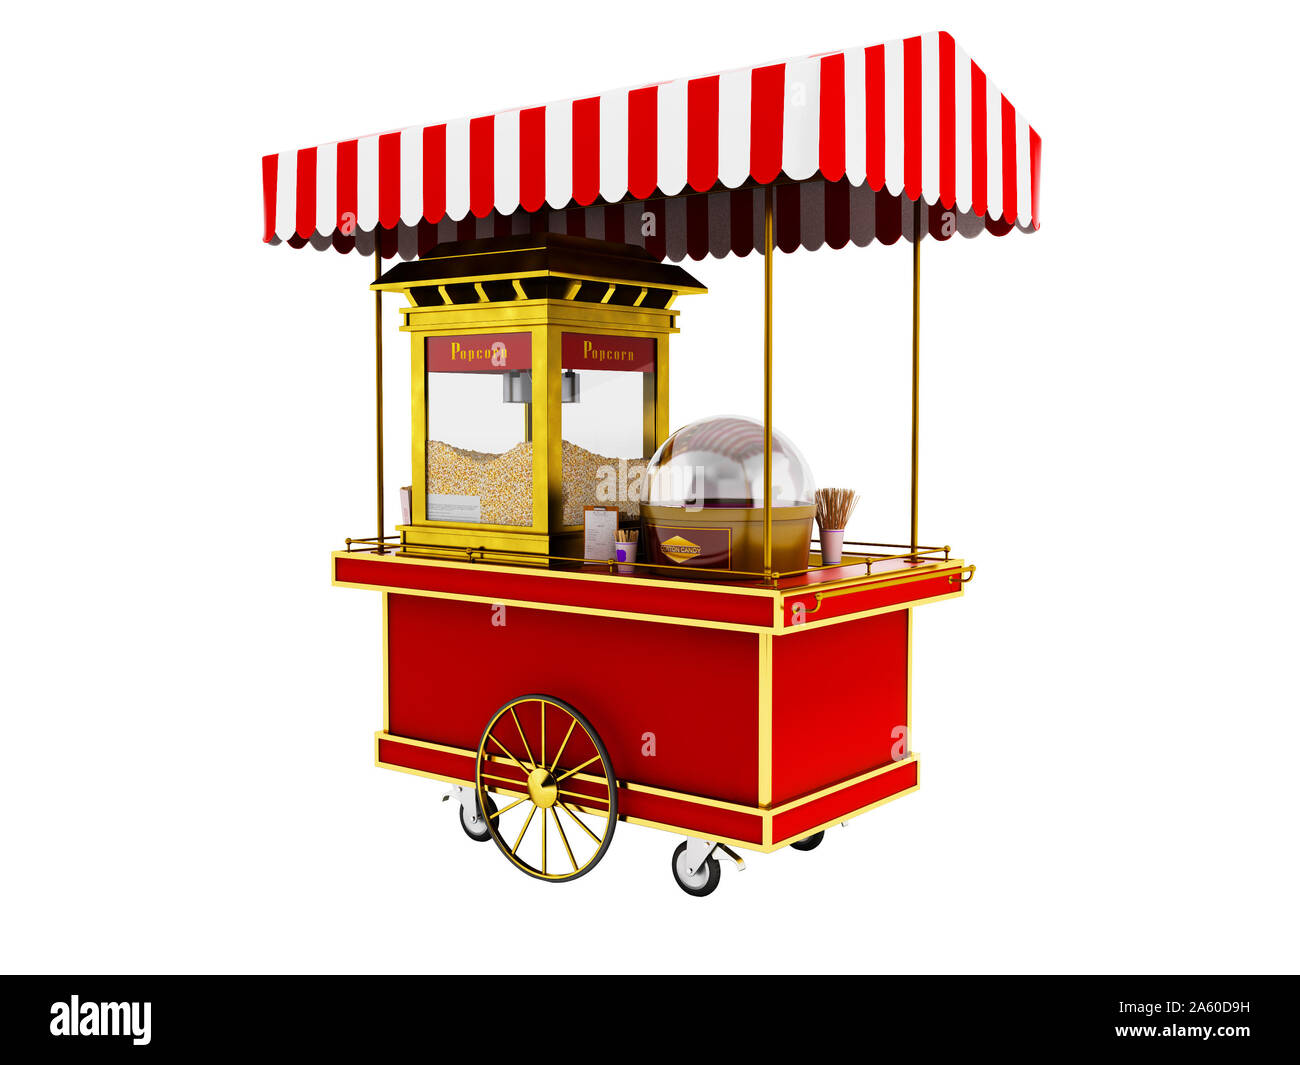 Modern Sale Of Popcorn From Red Truck 3d Render On White Background No Shadow Stock Photo Alamy